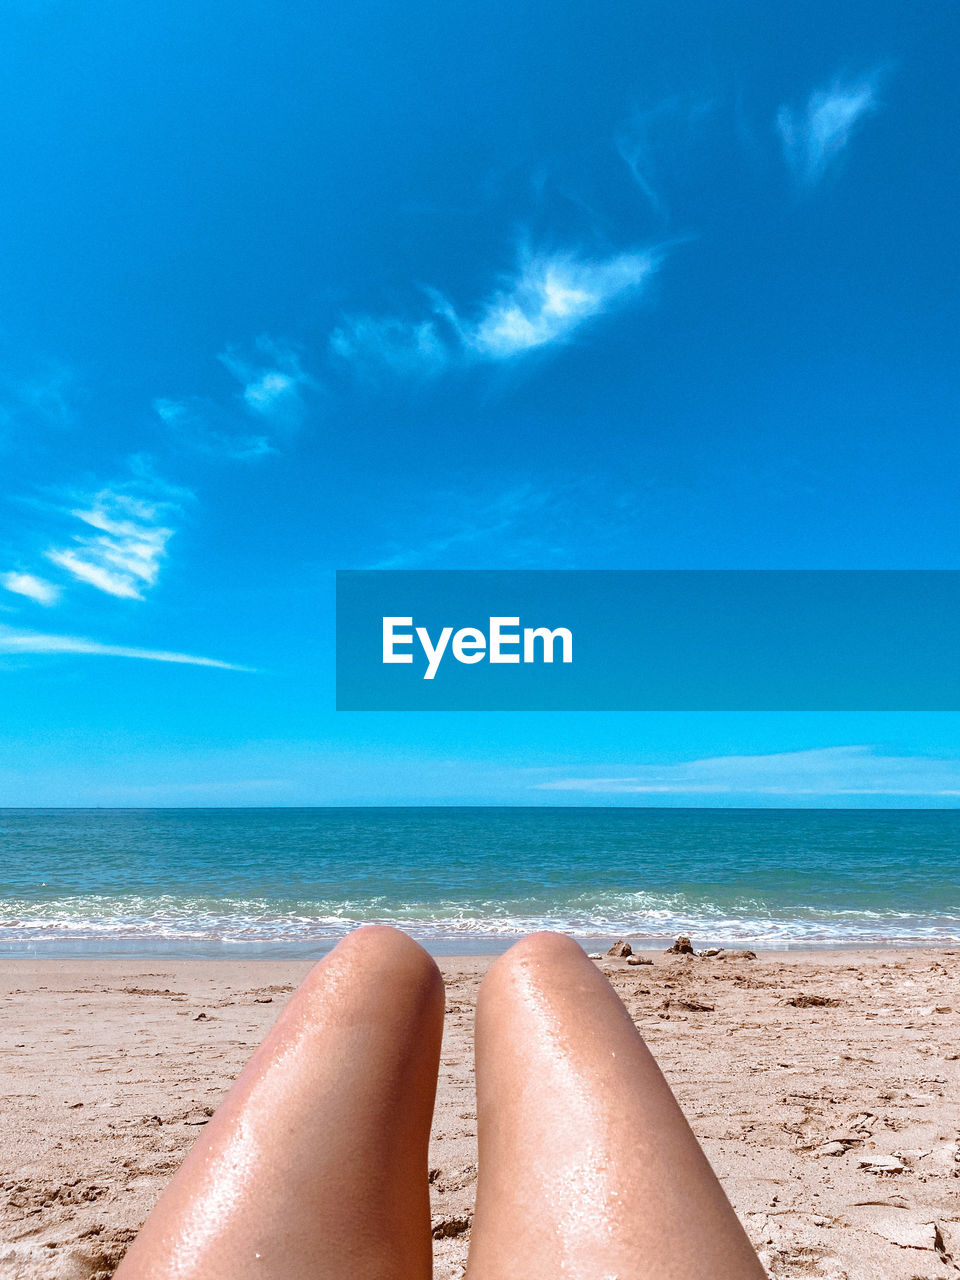 land, sea, beach, water, sky, human leg, sand, holiday, vacation, relaxation, trip, nature, low section, horizon over water, ocean, horizon, one person, blue, summer, adult, wave, beauty in nature, leisure activity, human foot, women, limb, scenics - nature, tranquility, shore, travel destinations, sunlight, travel, human limb, lifestyles, cloud, sun tanning, day, tranquil scene, body of water, personal perspective, outdoors, idyllic, sun, barefoot, sunbathing, tropical climate, copy space, lying down, azure, tourism, wind wave